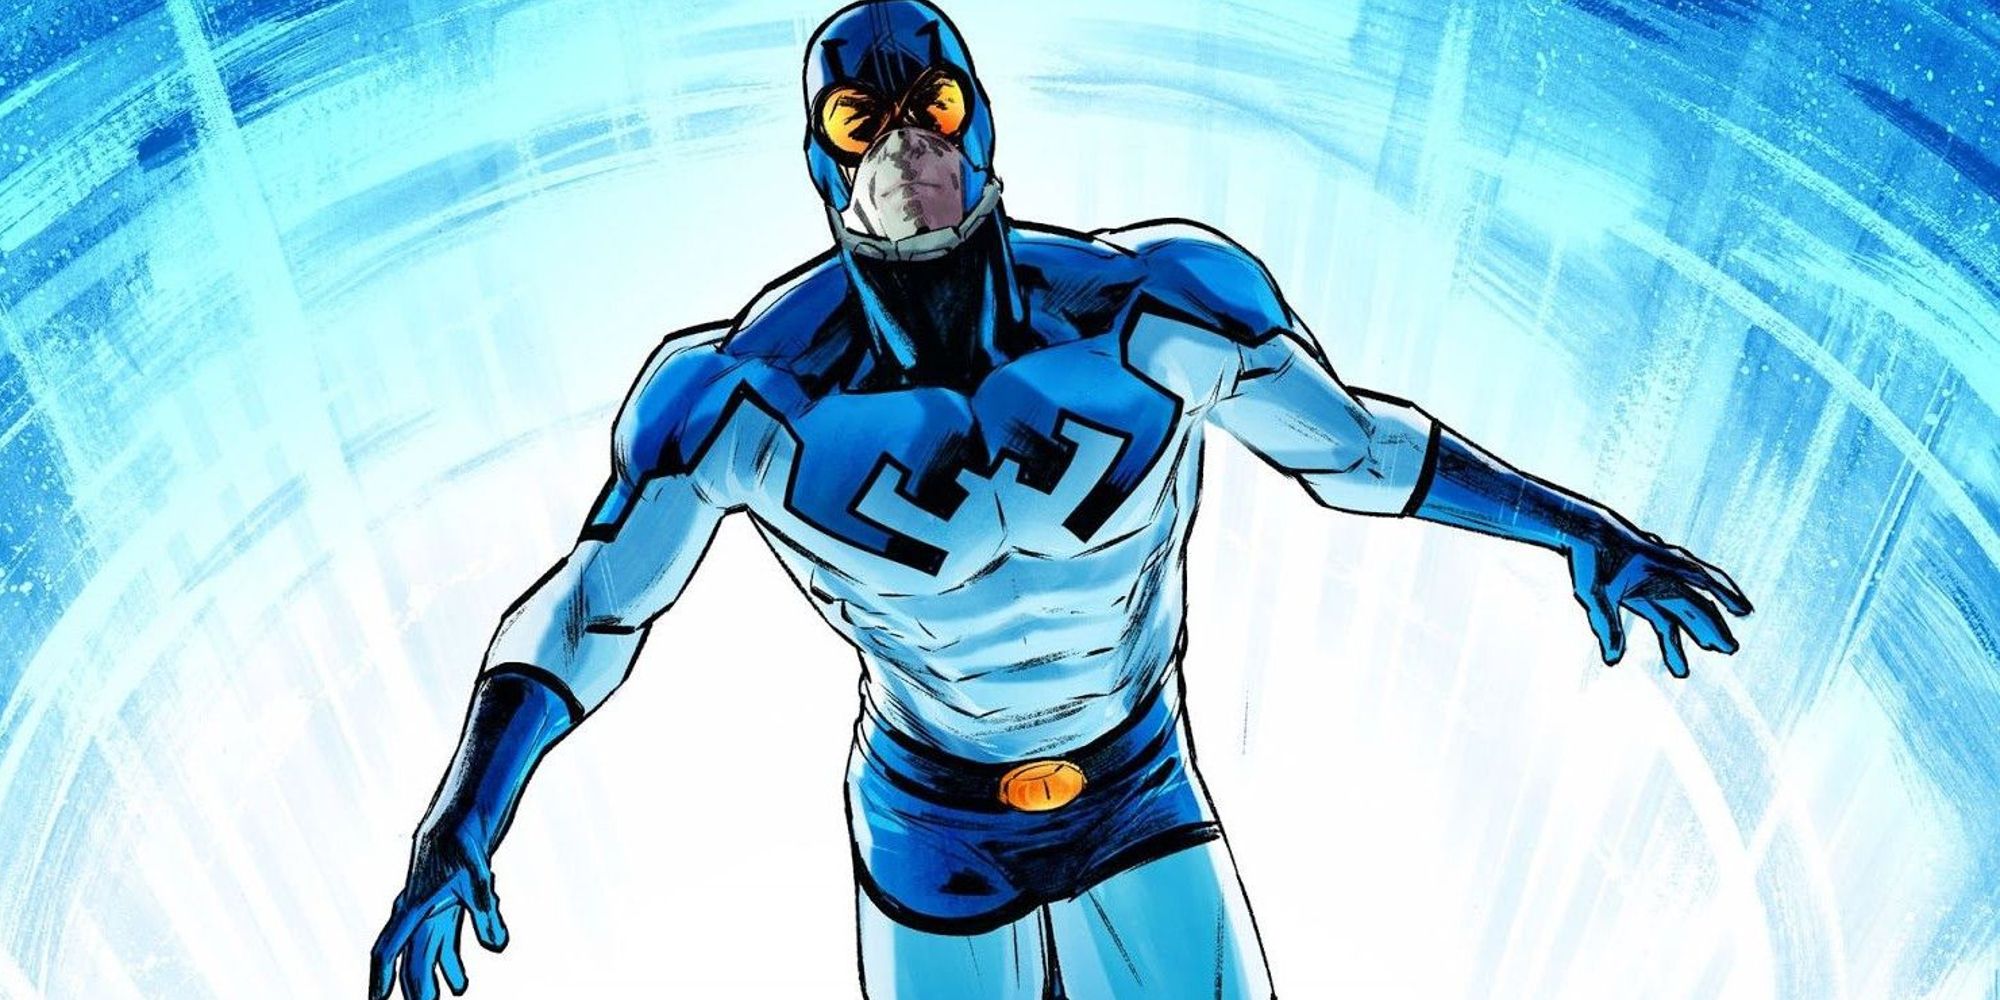 Ted Kord as the second Blue Beetle in DC comics